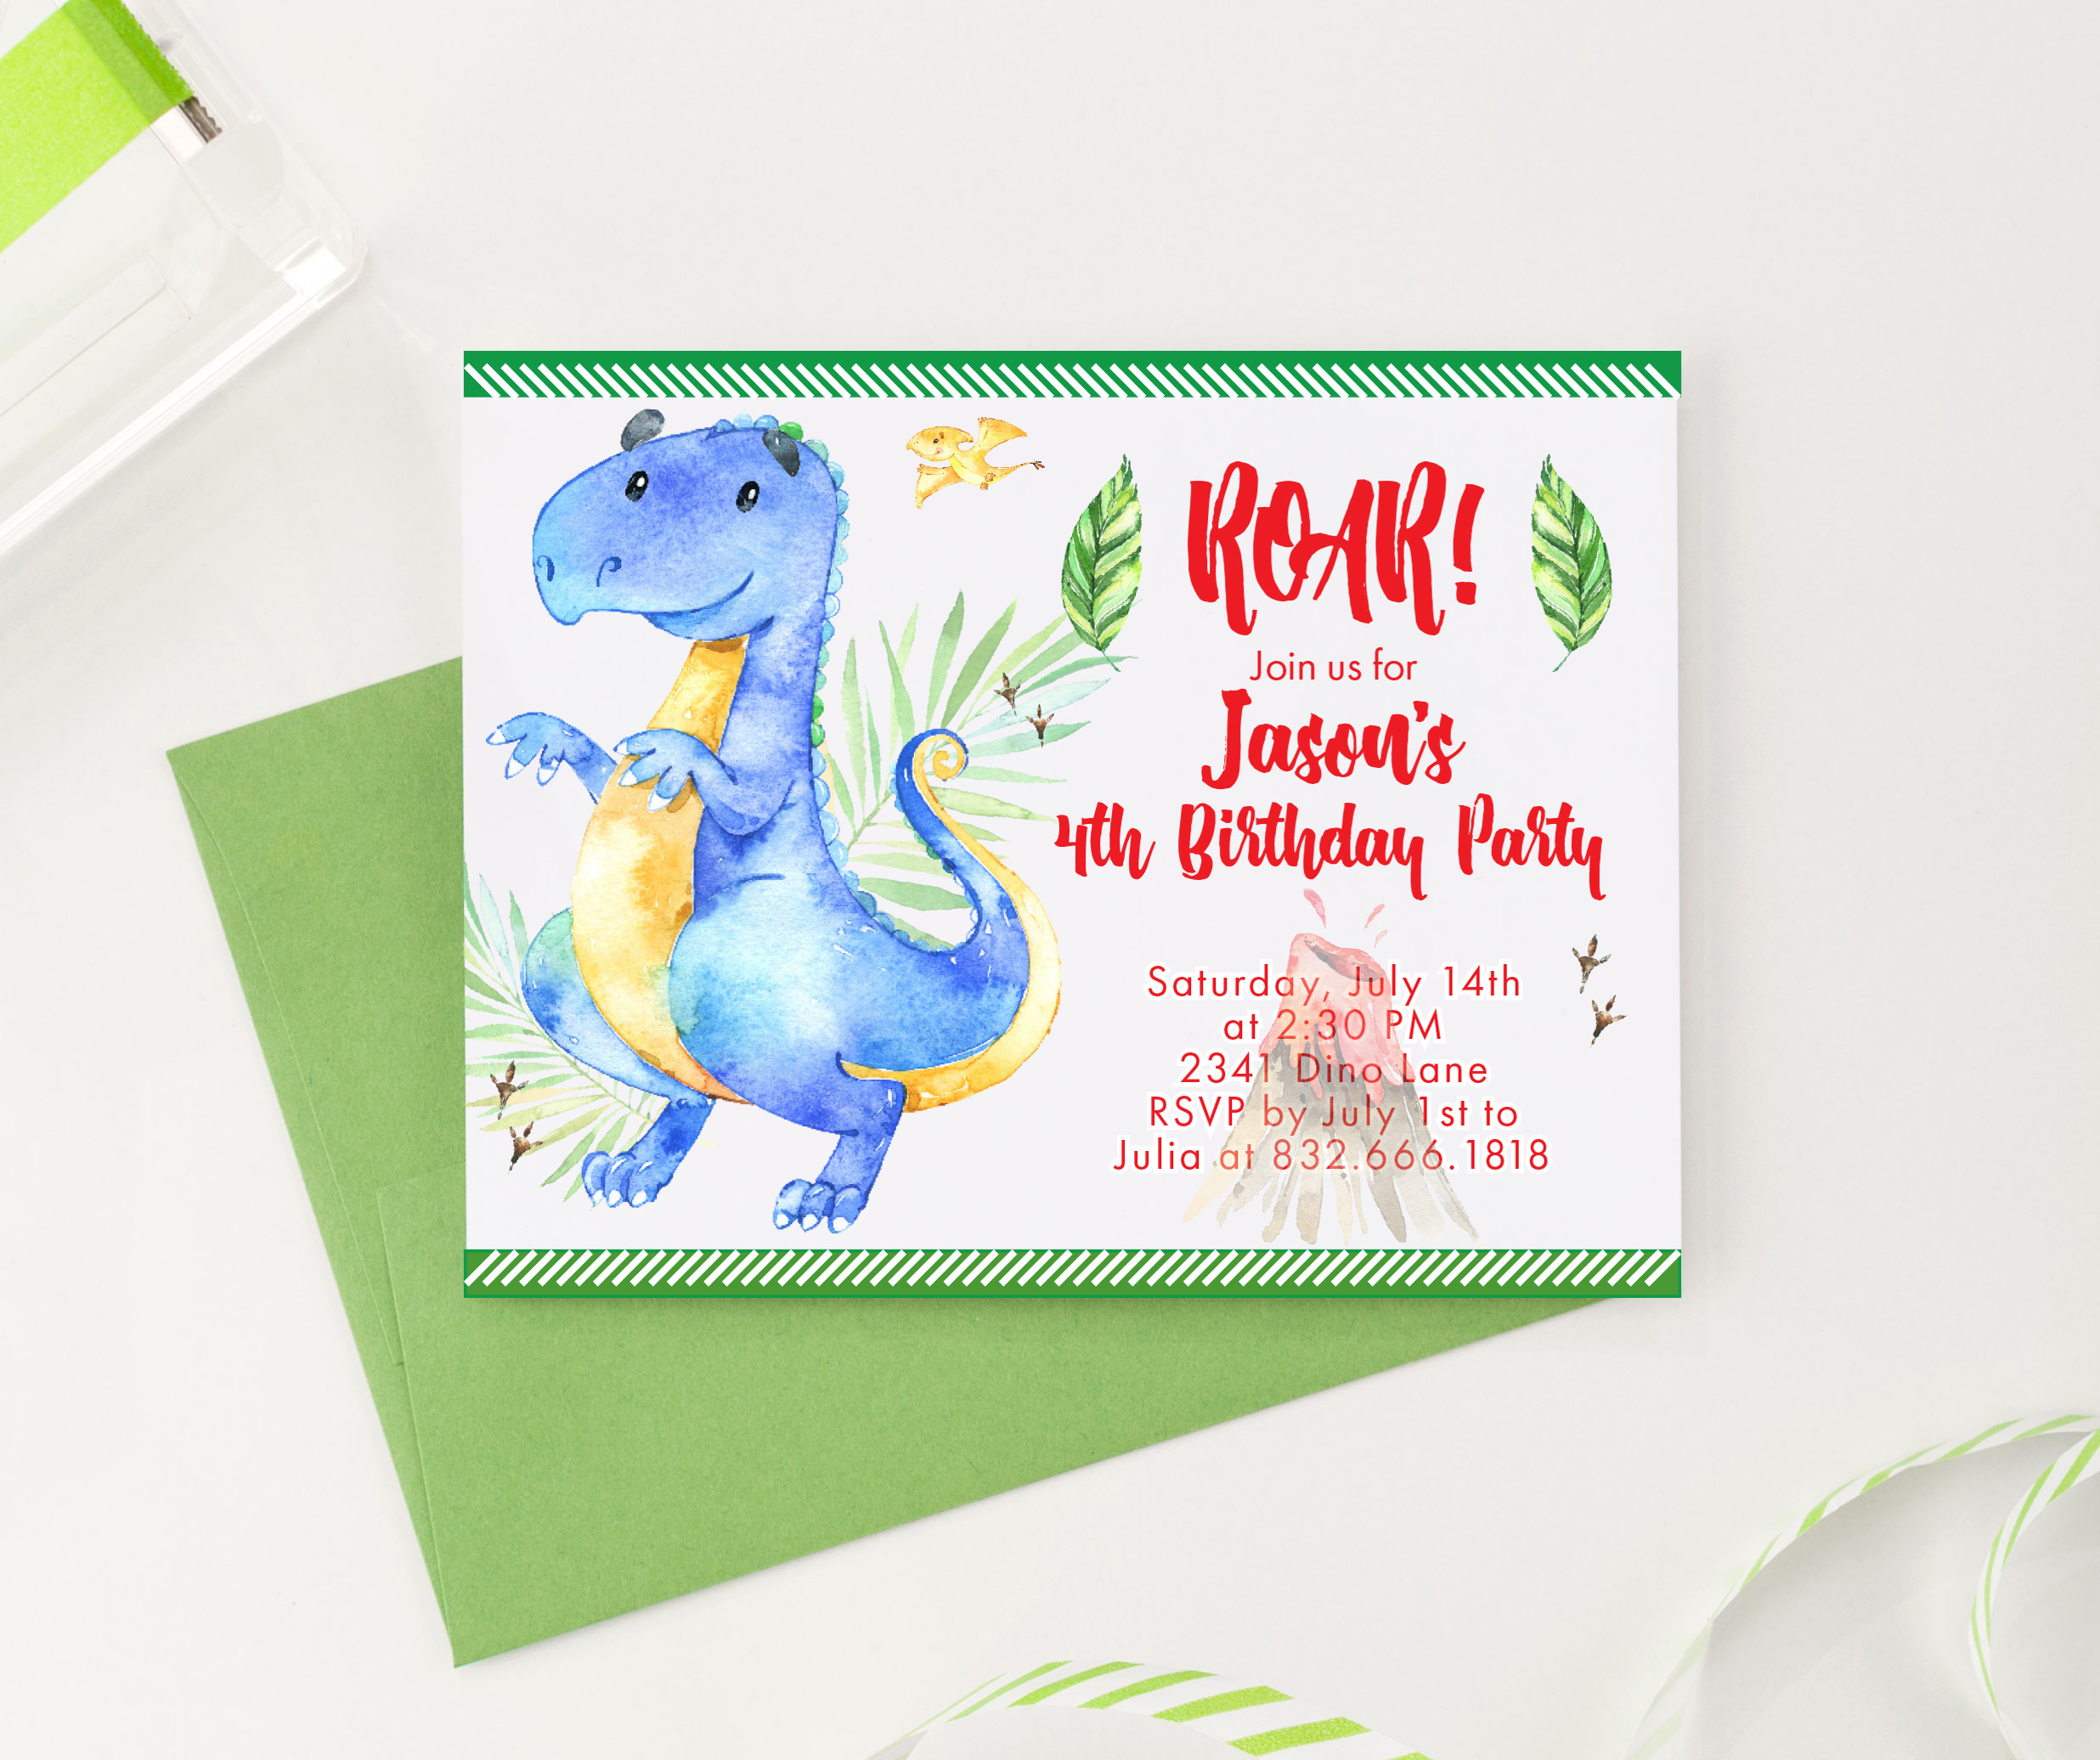 Personalized Birthday Party Invitations
 Personalized Dinosaur Birthday Invitation Birthday